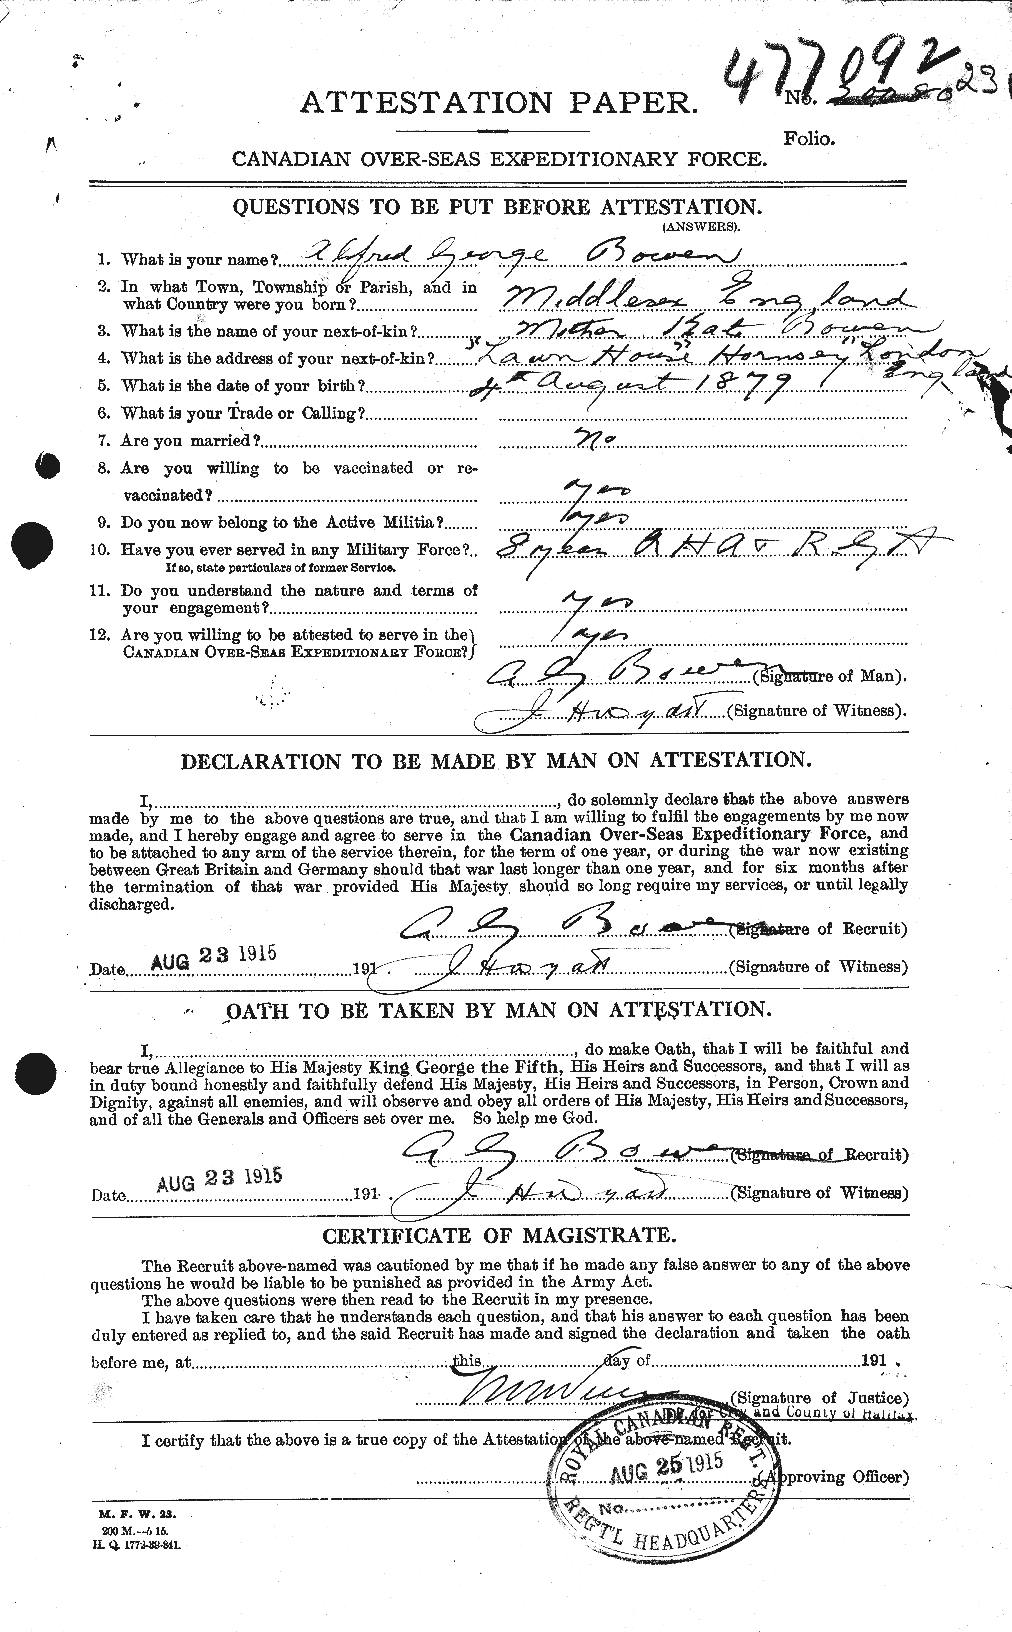 Personnel Records of the First World War - CEF 255347a